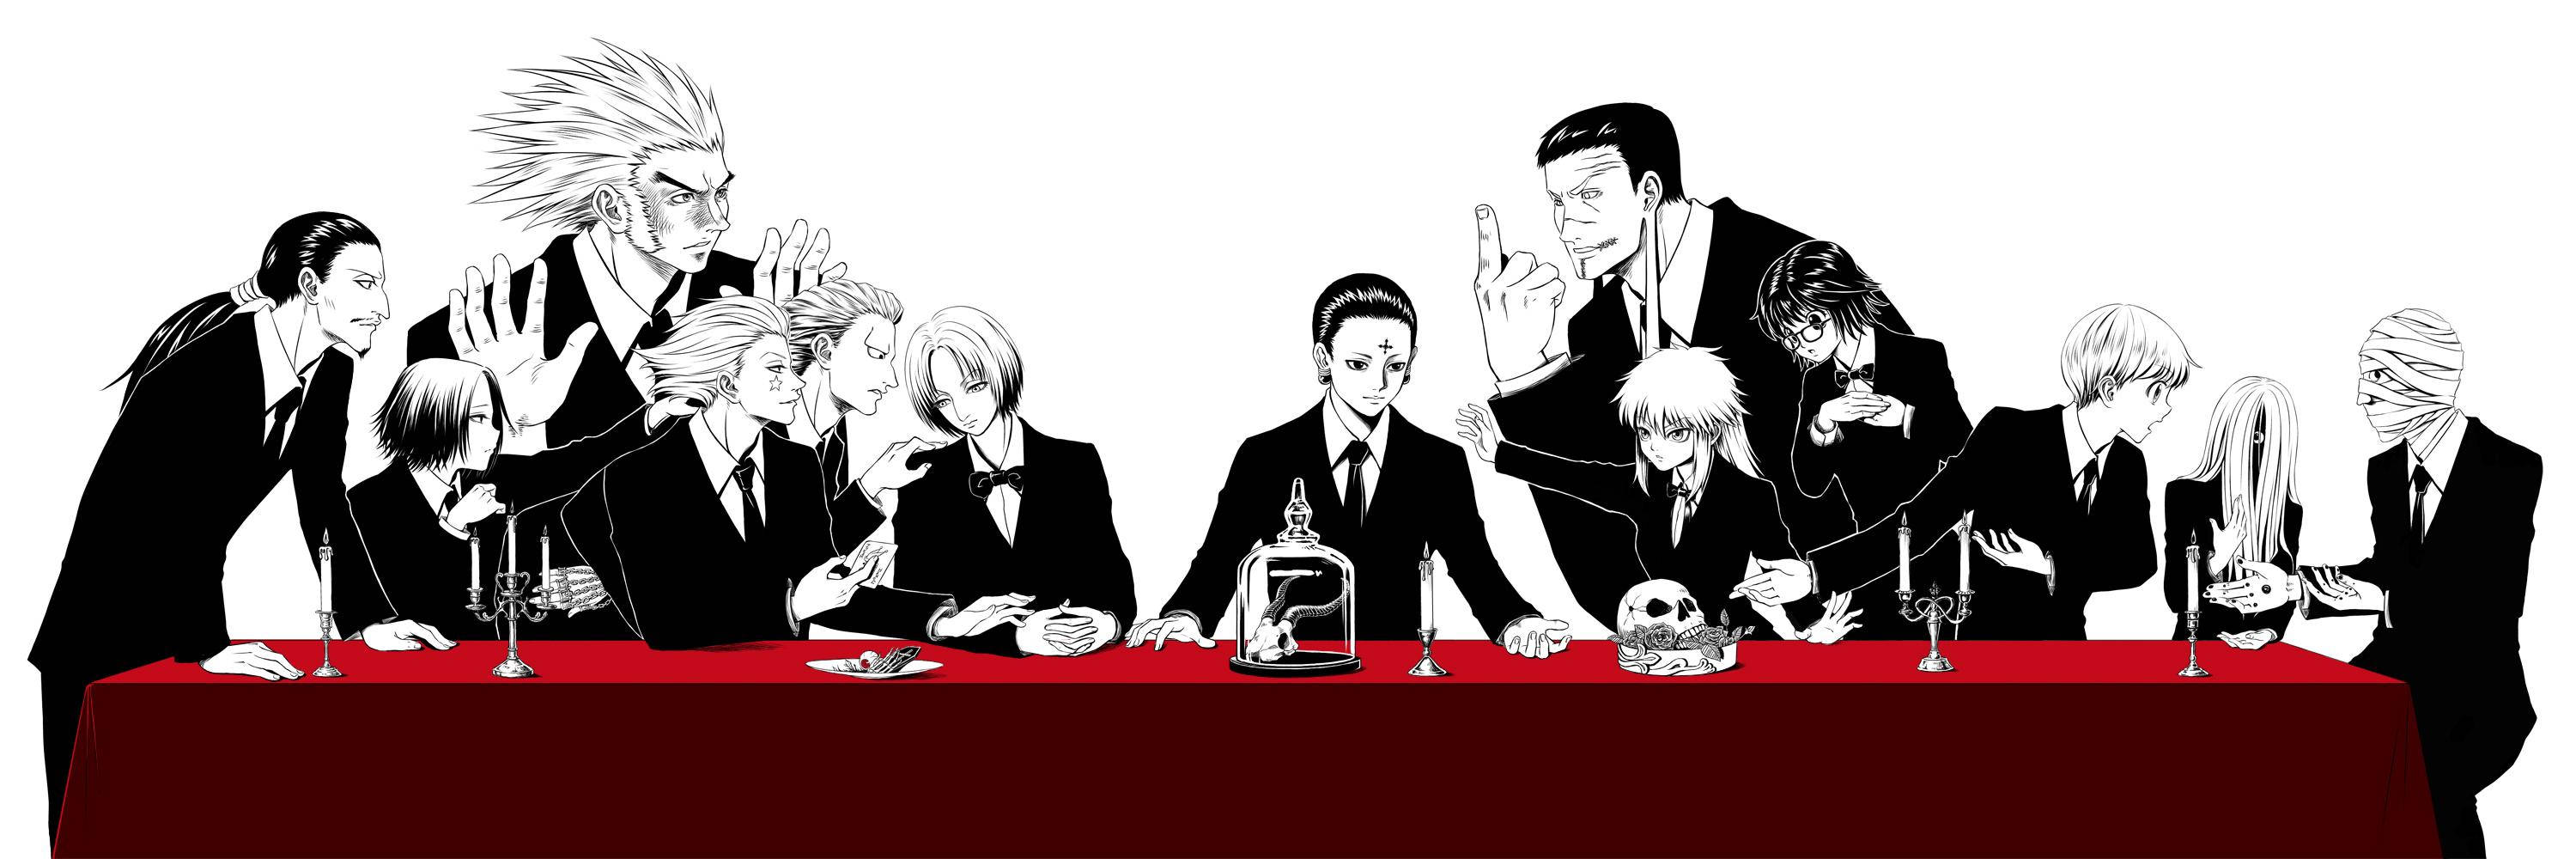 Phantom Troupe On Red Table